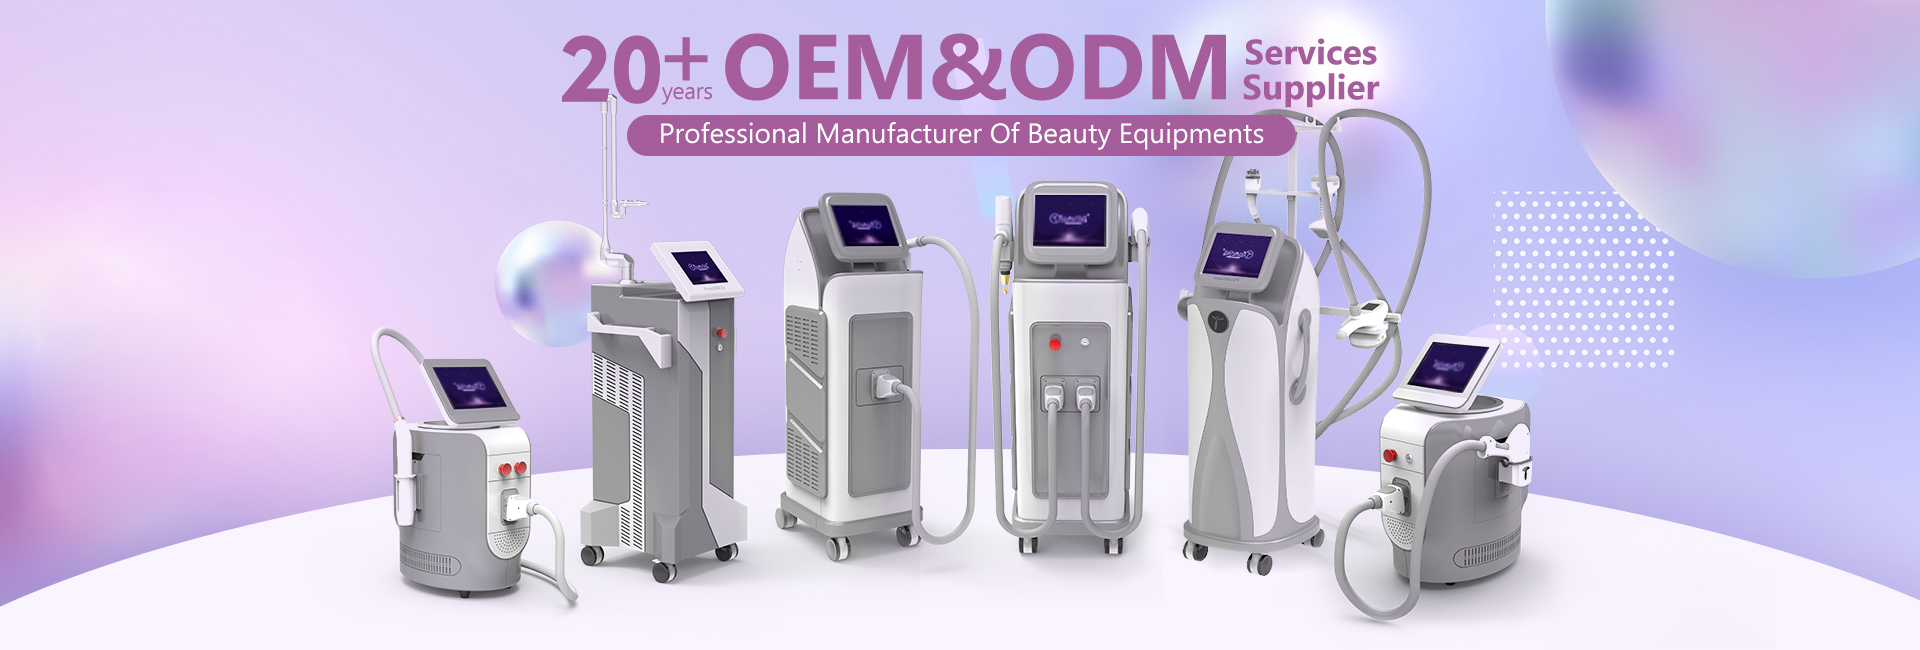 Hot Sale clinical medical CO2 Surgical Fractional face lifting wrinkle removal vaginal tightening co2 laser skin machine